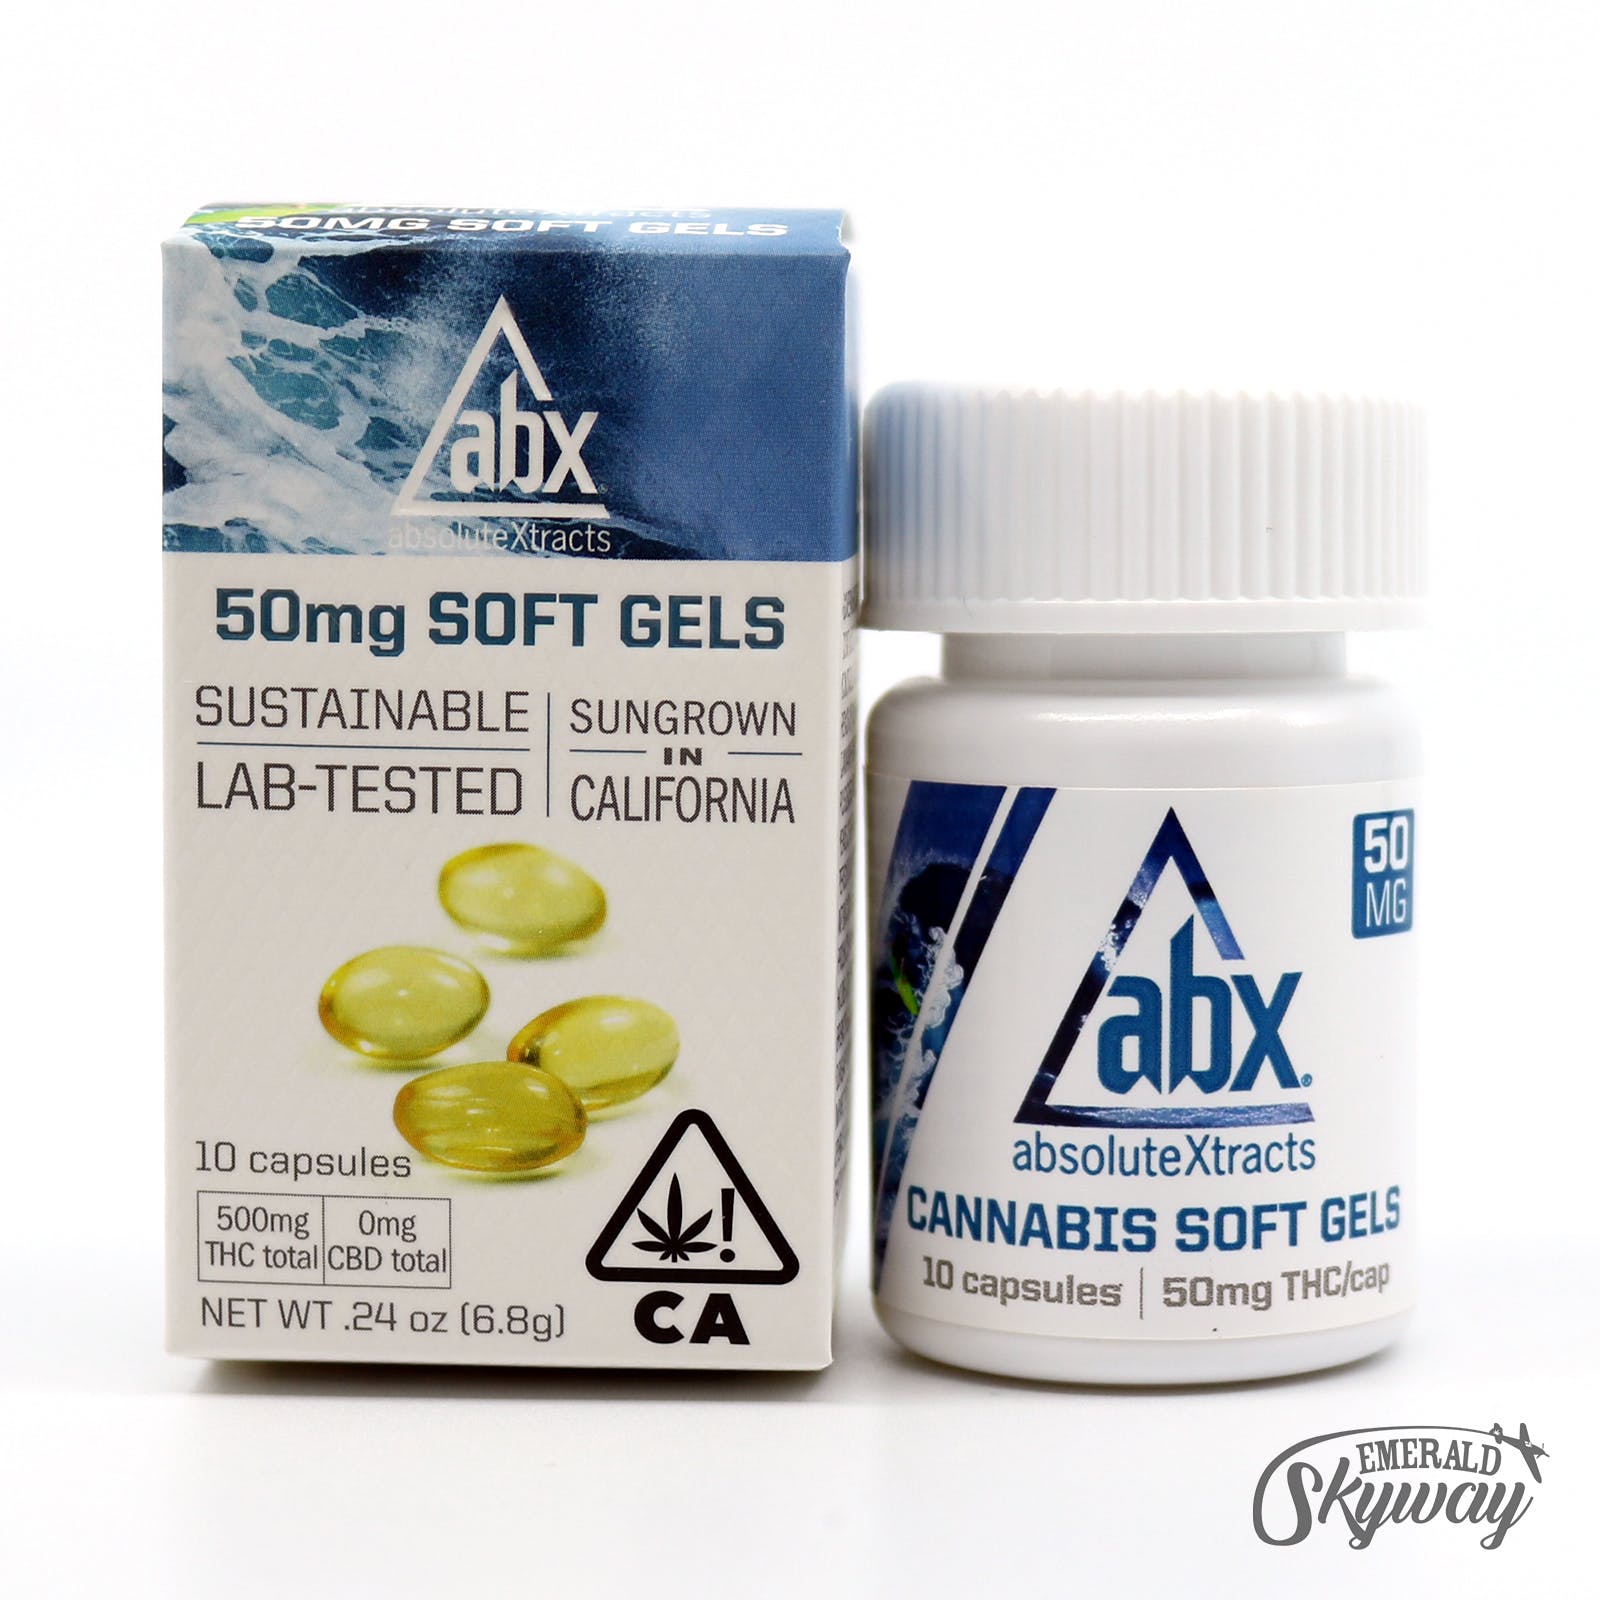 AbsoluteXtracts: 50mg Soft Gels - 10 count